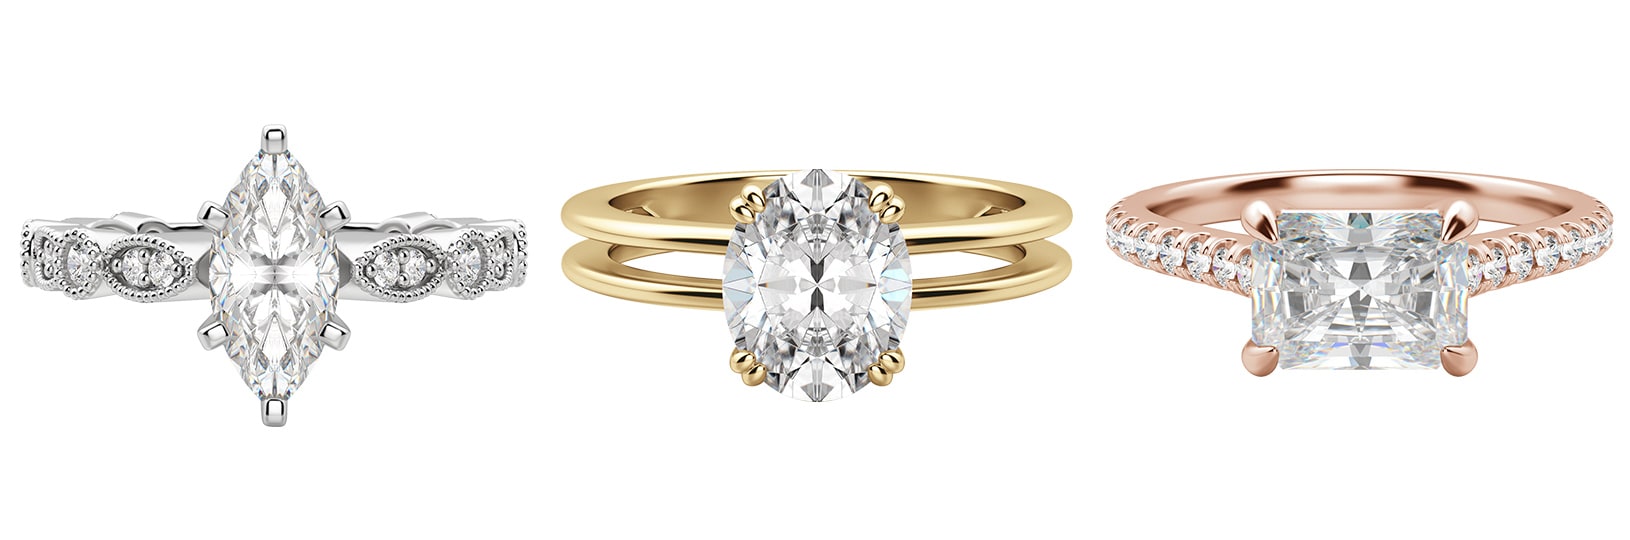 Three classic engagement ring styles featuring marquise, oval and emerald cut stones